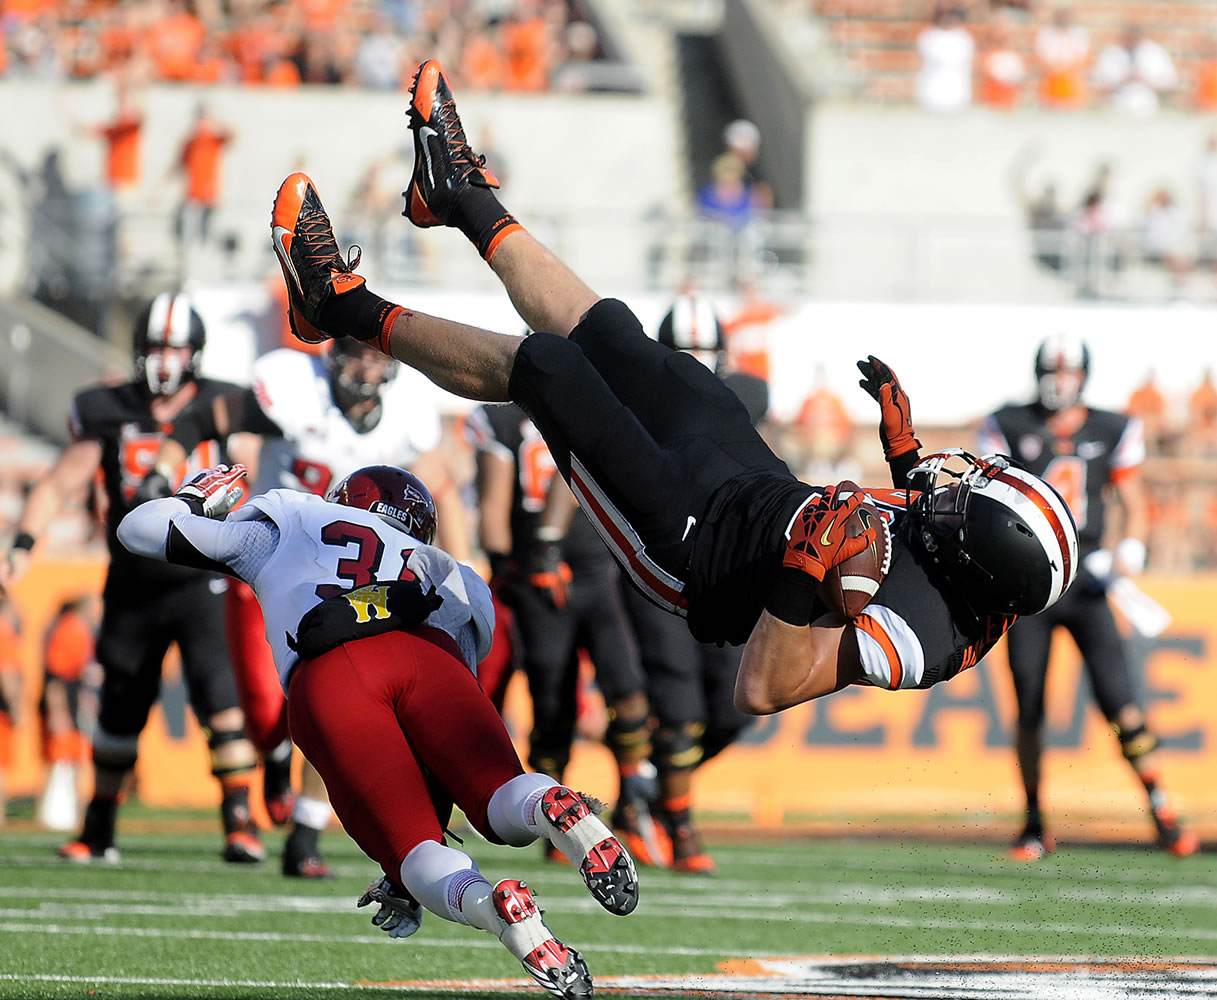 Oregon State's Connor Hamlett (89) flips over Eastern Washington's T.J. Lee (31) while leaping to catch a pass in the third quarter Saturday Aug. 31, 2013 in Corvallis, Ore.